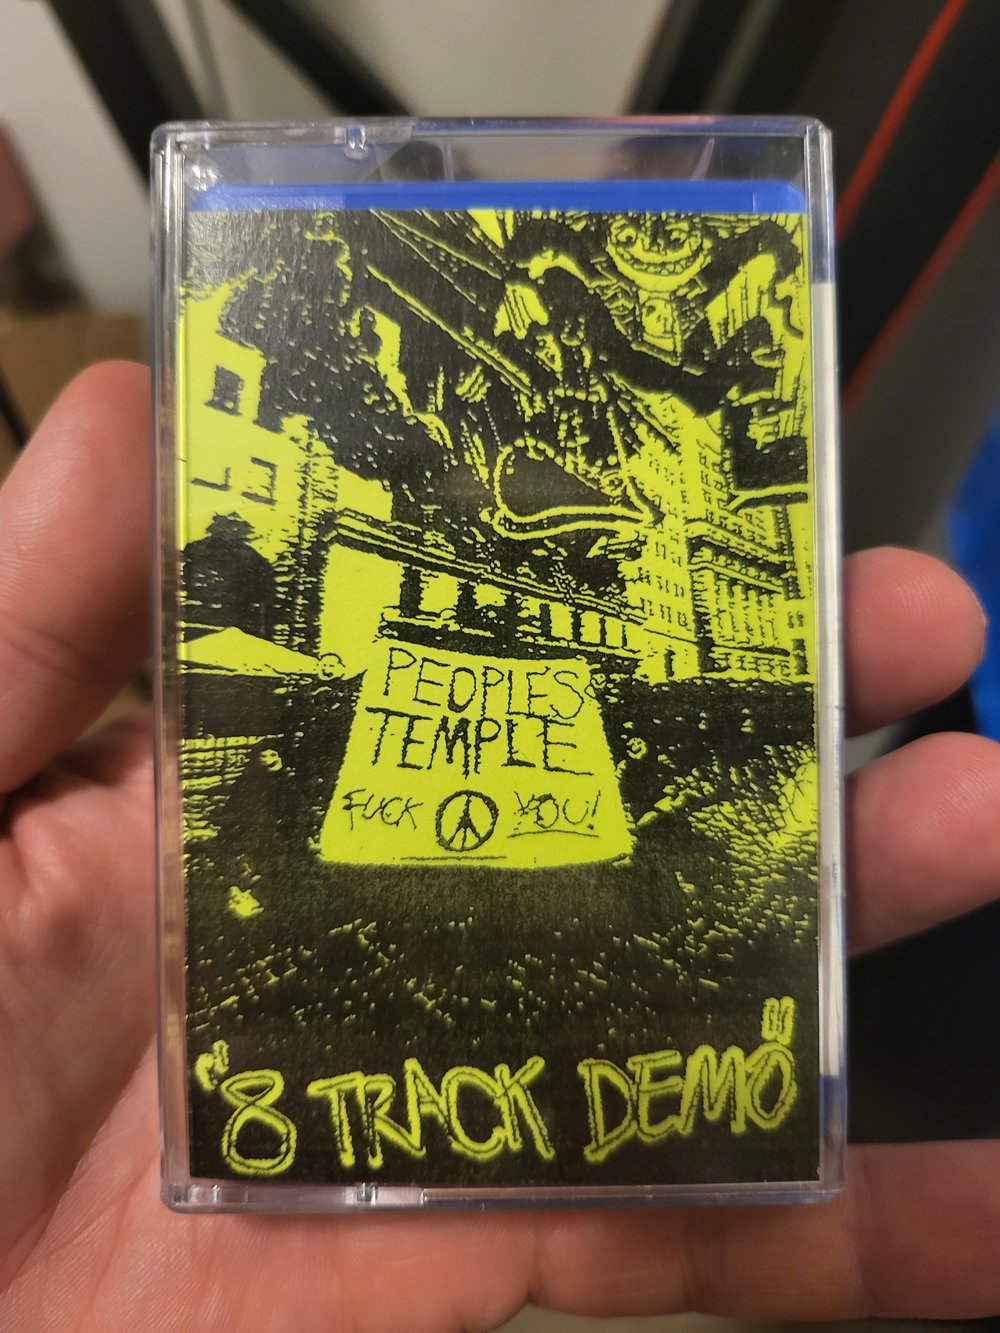 The Peoples Temple - 8 Track Demo